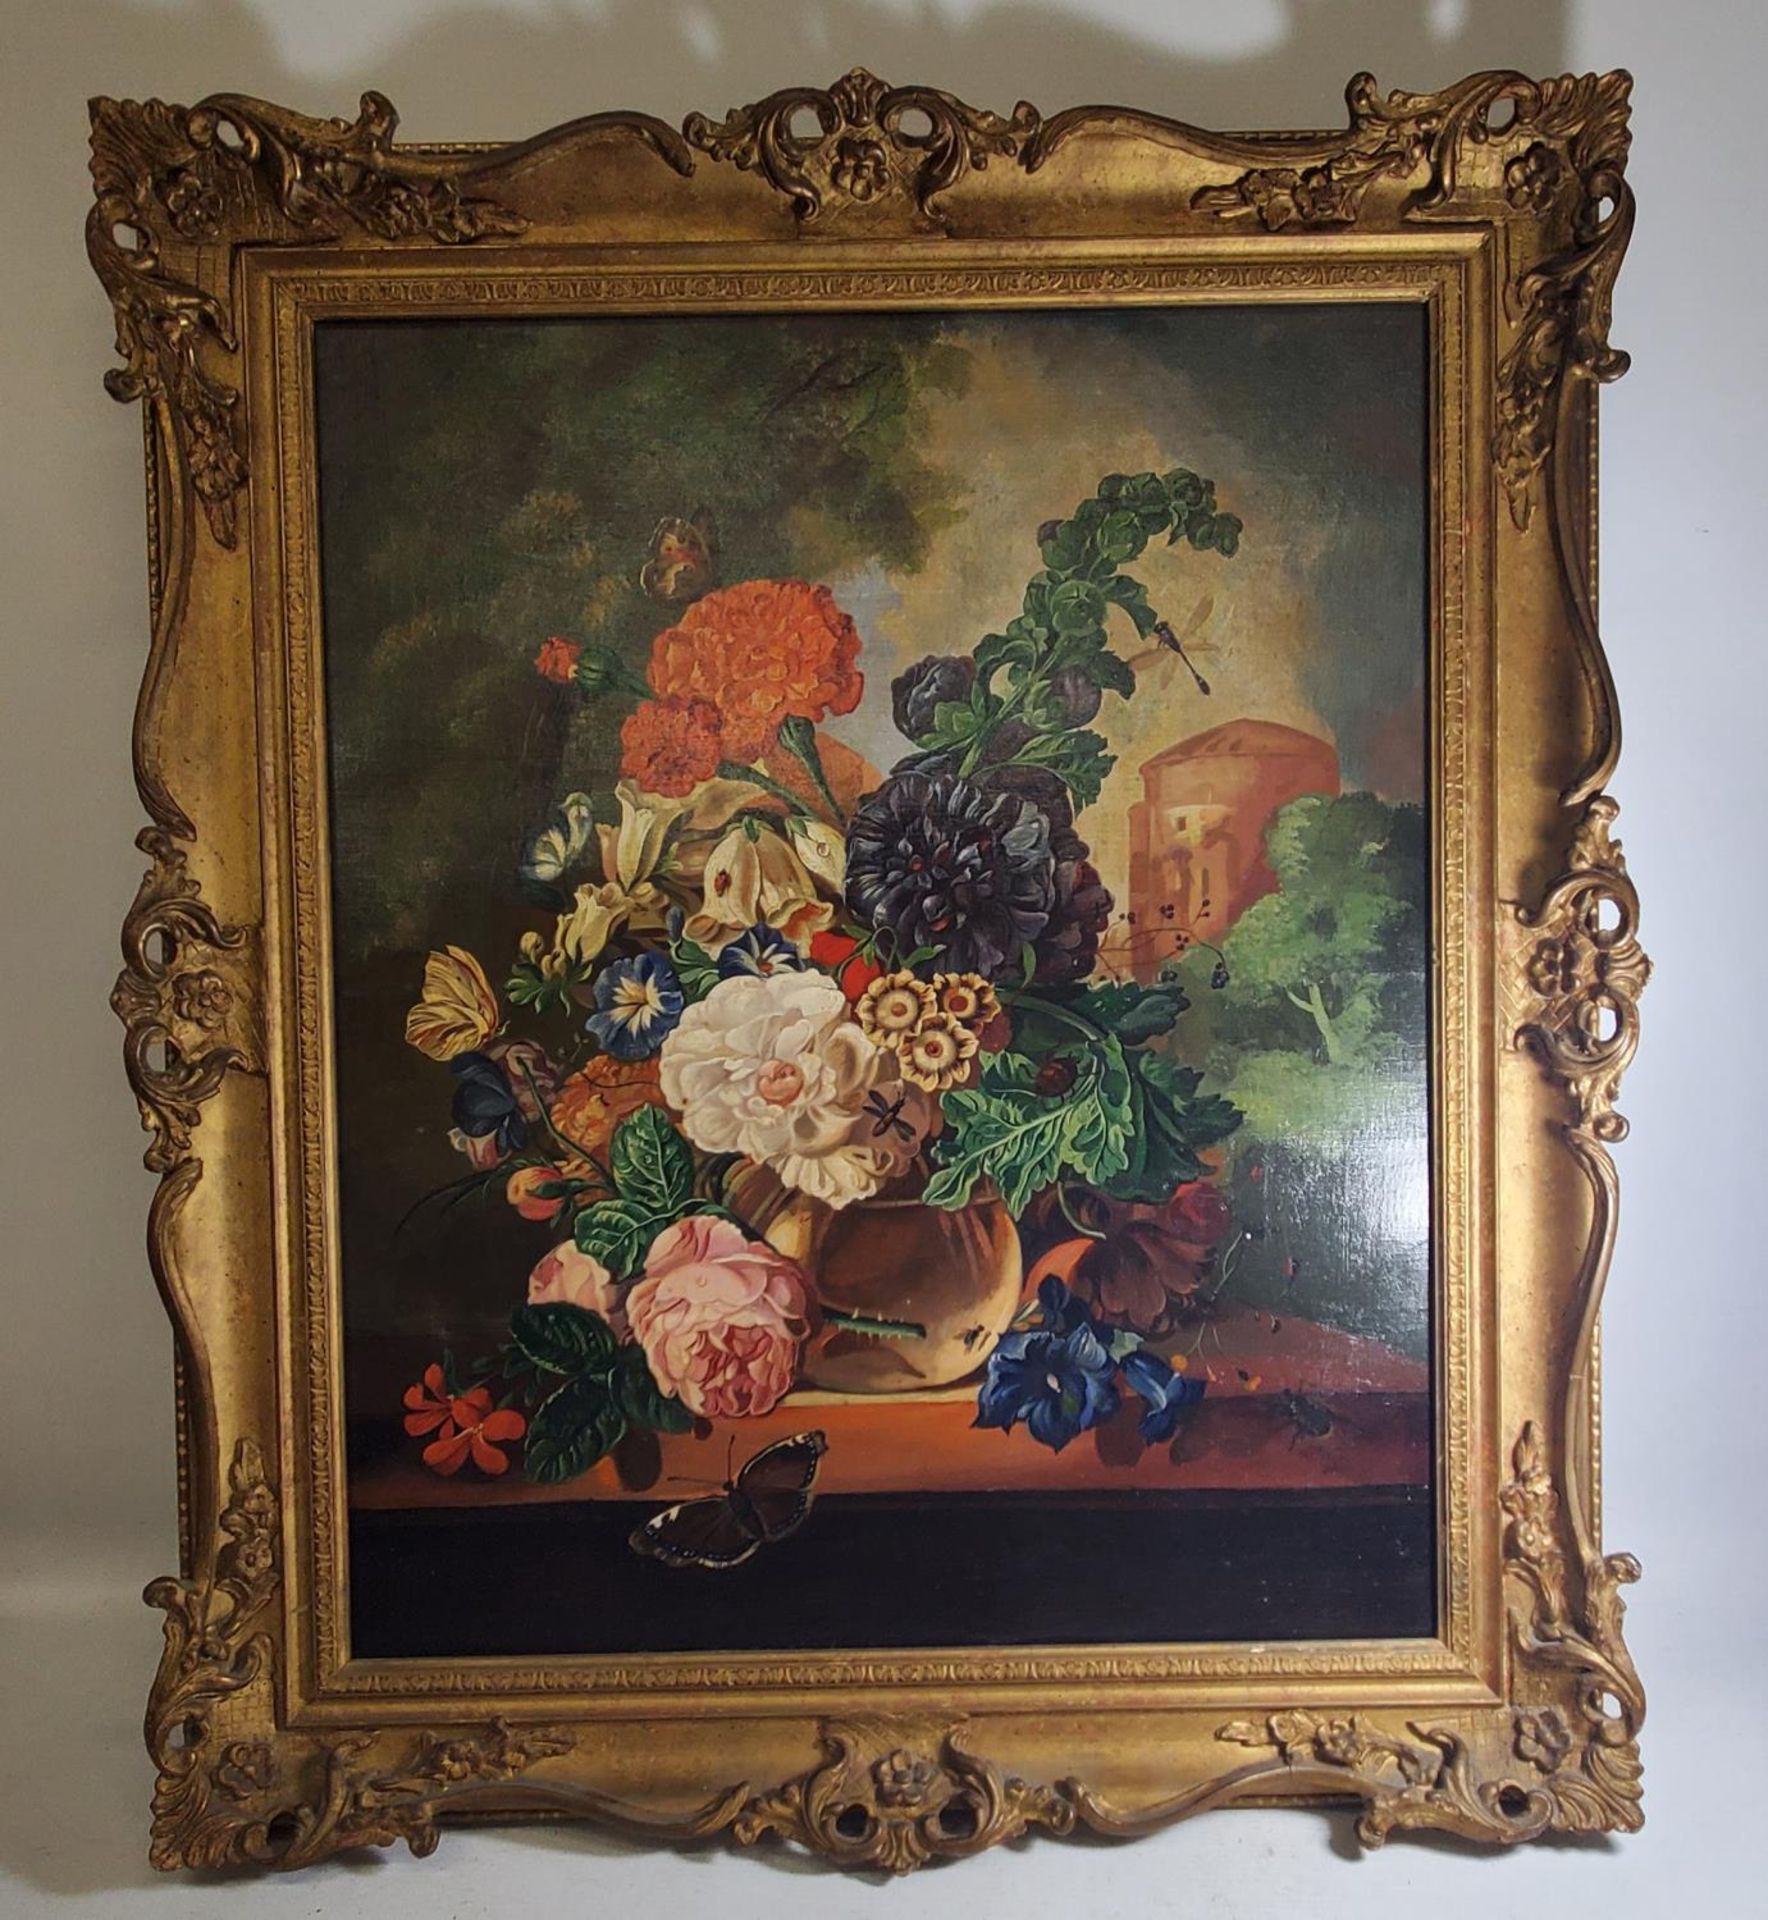 A 20TH CENTURY OIL ON CANVAS DEPICTING A VASE OF FLOWERS IN A CASTLE LANDSCAPE, 60X49CM, IN SWEPT